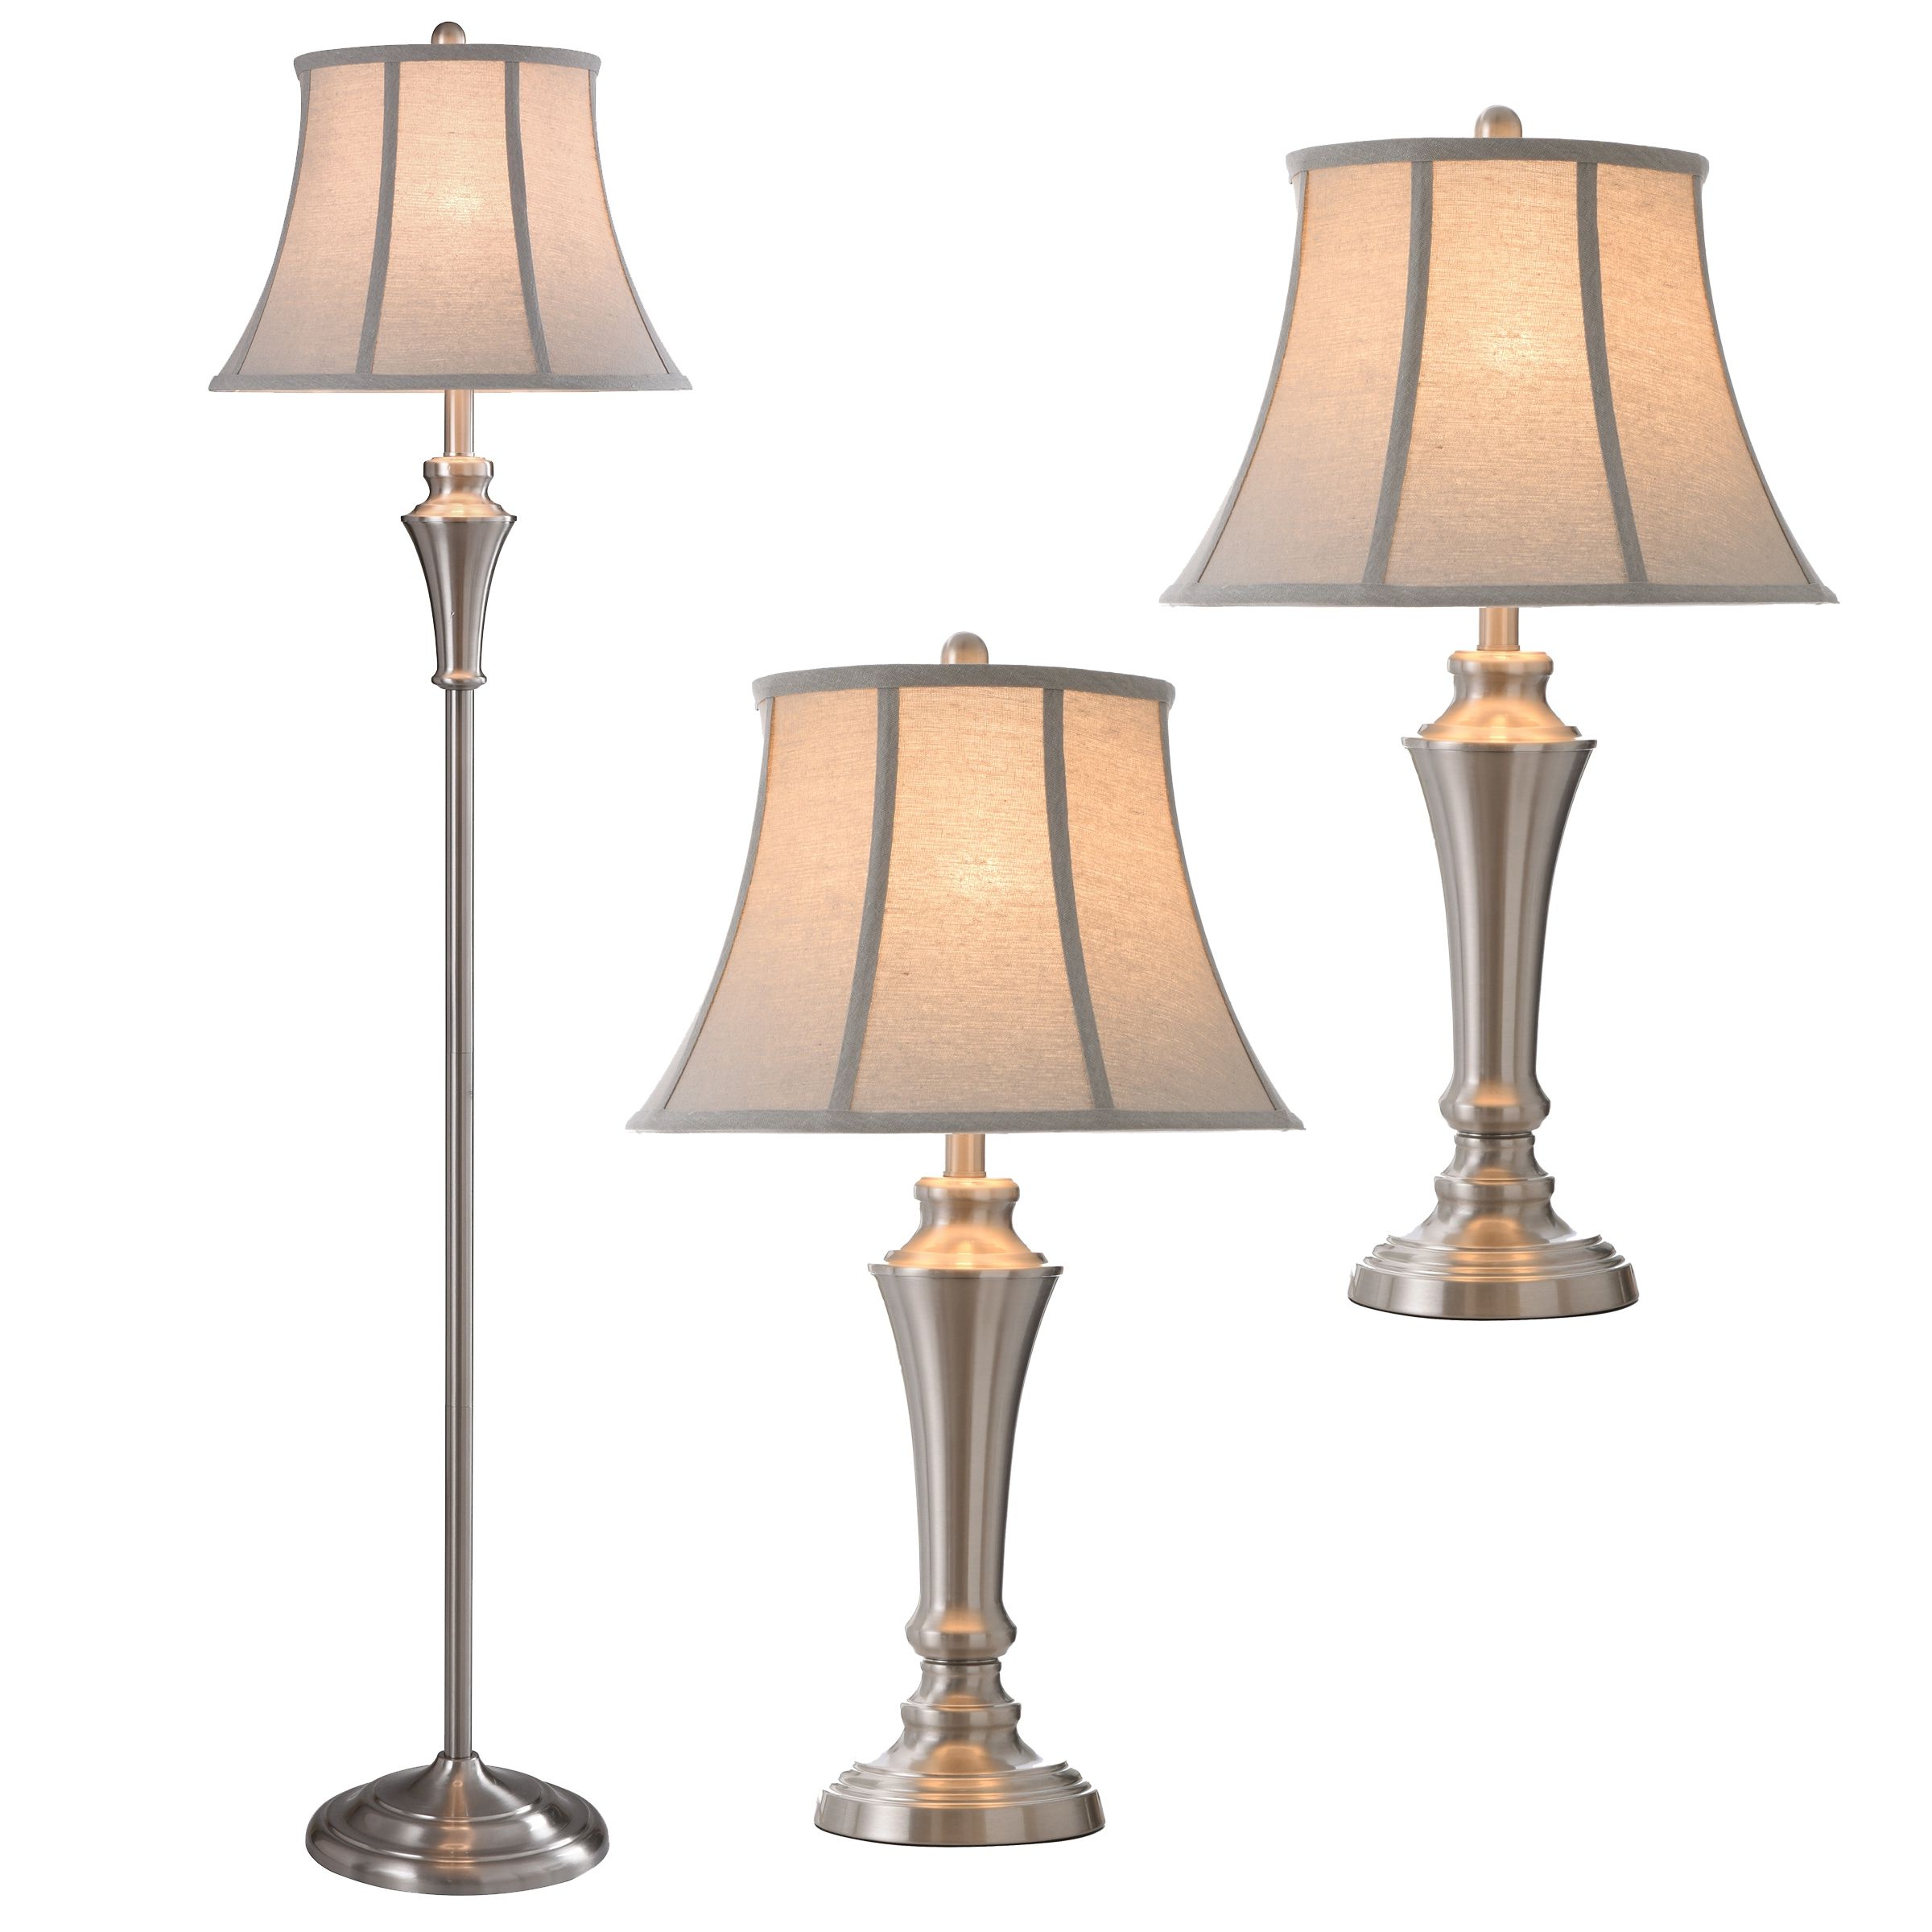 Stylecraft Home Collection Stylecraft Home Collection  Floor Lamp/table Lamp  Set  Brushed Nickel Finish  Geneva Taupe Fabric Shade  3 Piece Set (2  Table, 1 Floor) In The Lamp Sets Department At Lowes Throughout 3 Piece Set Floor Lamps (View 12 of 20)